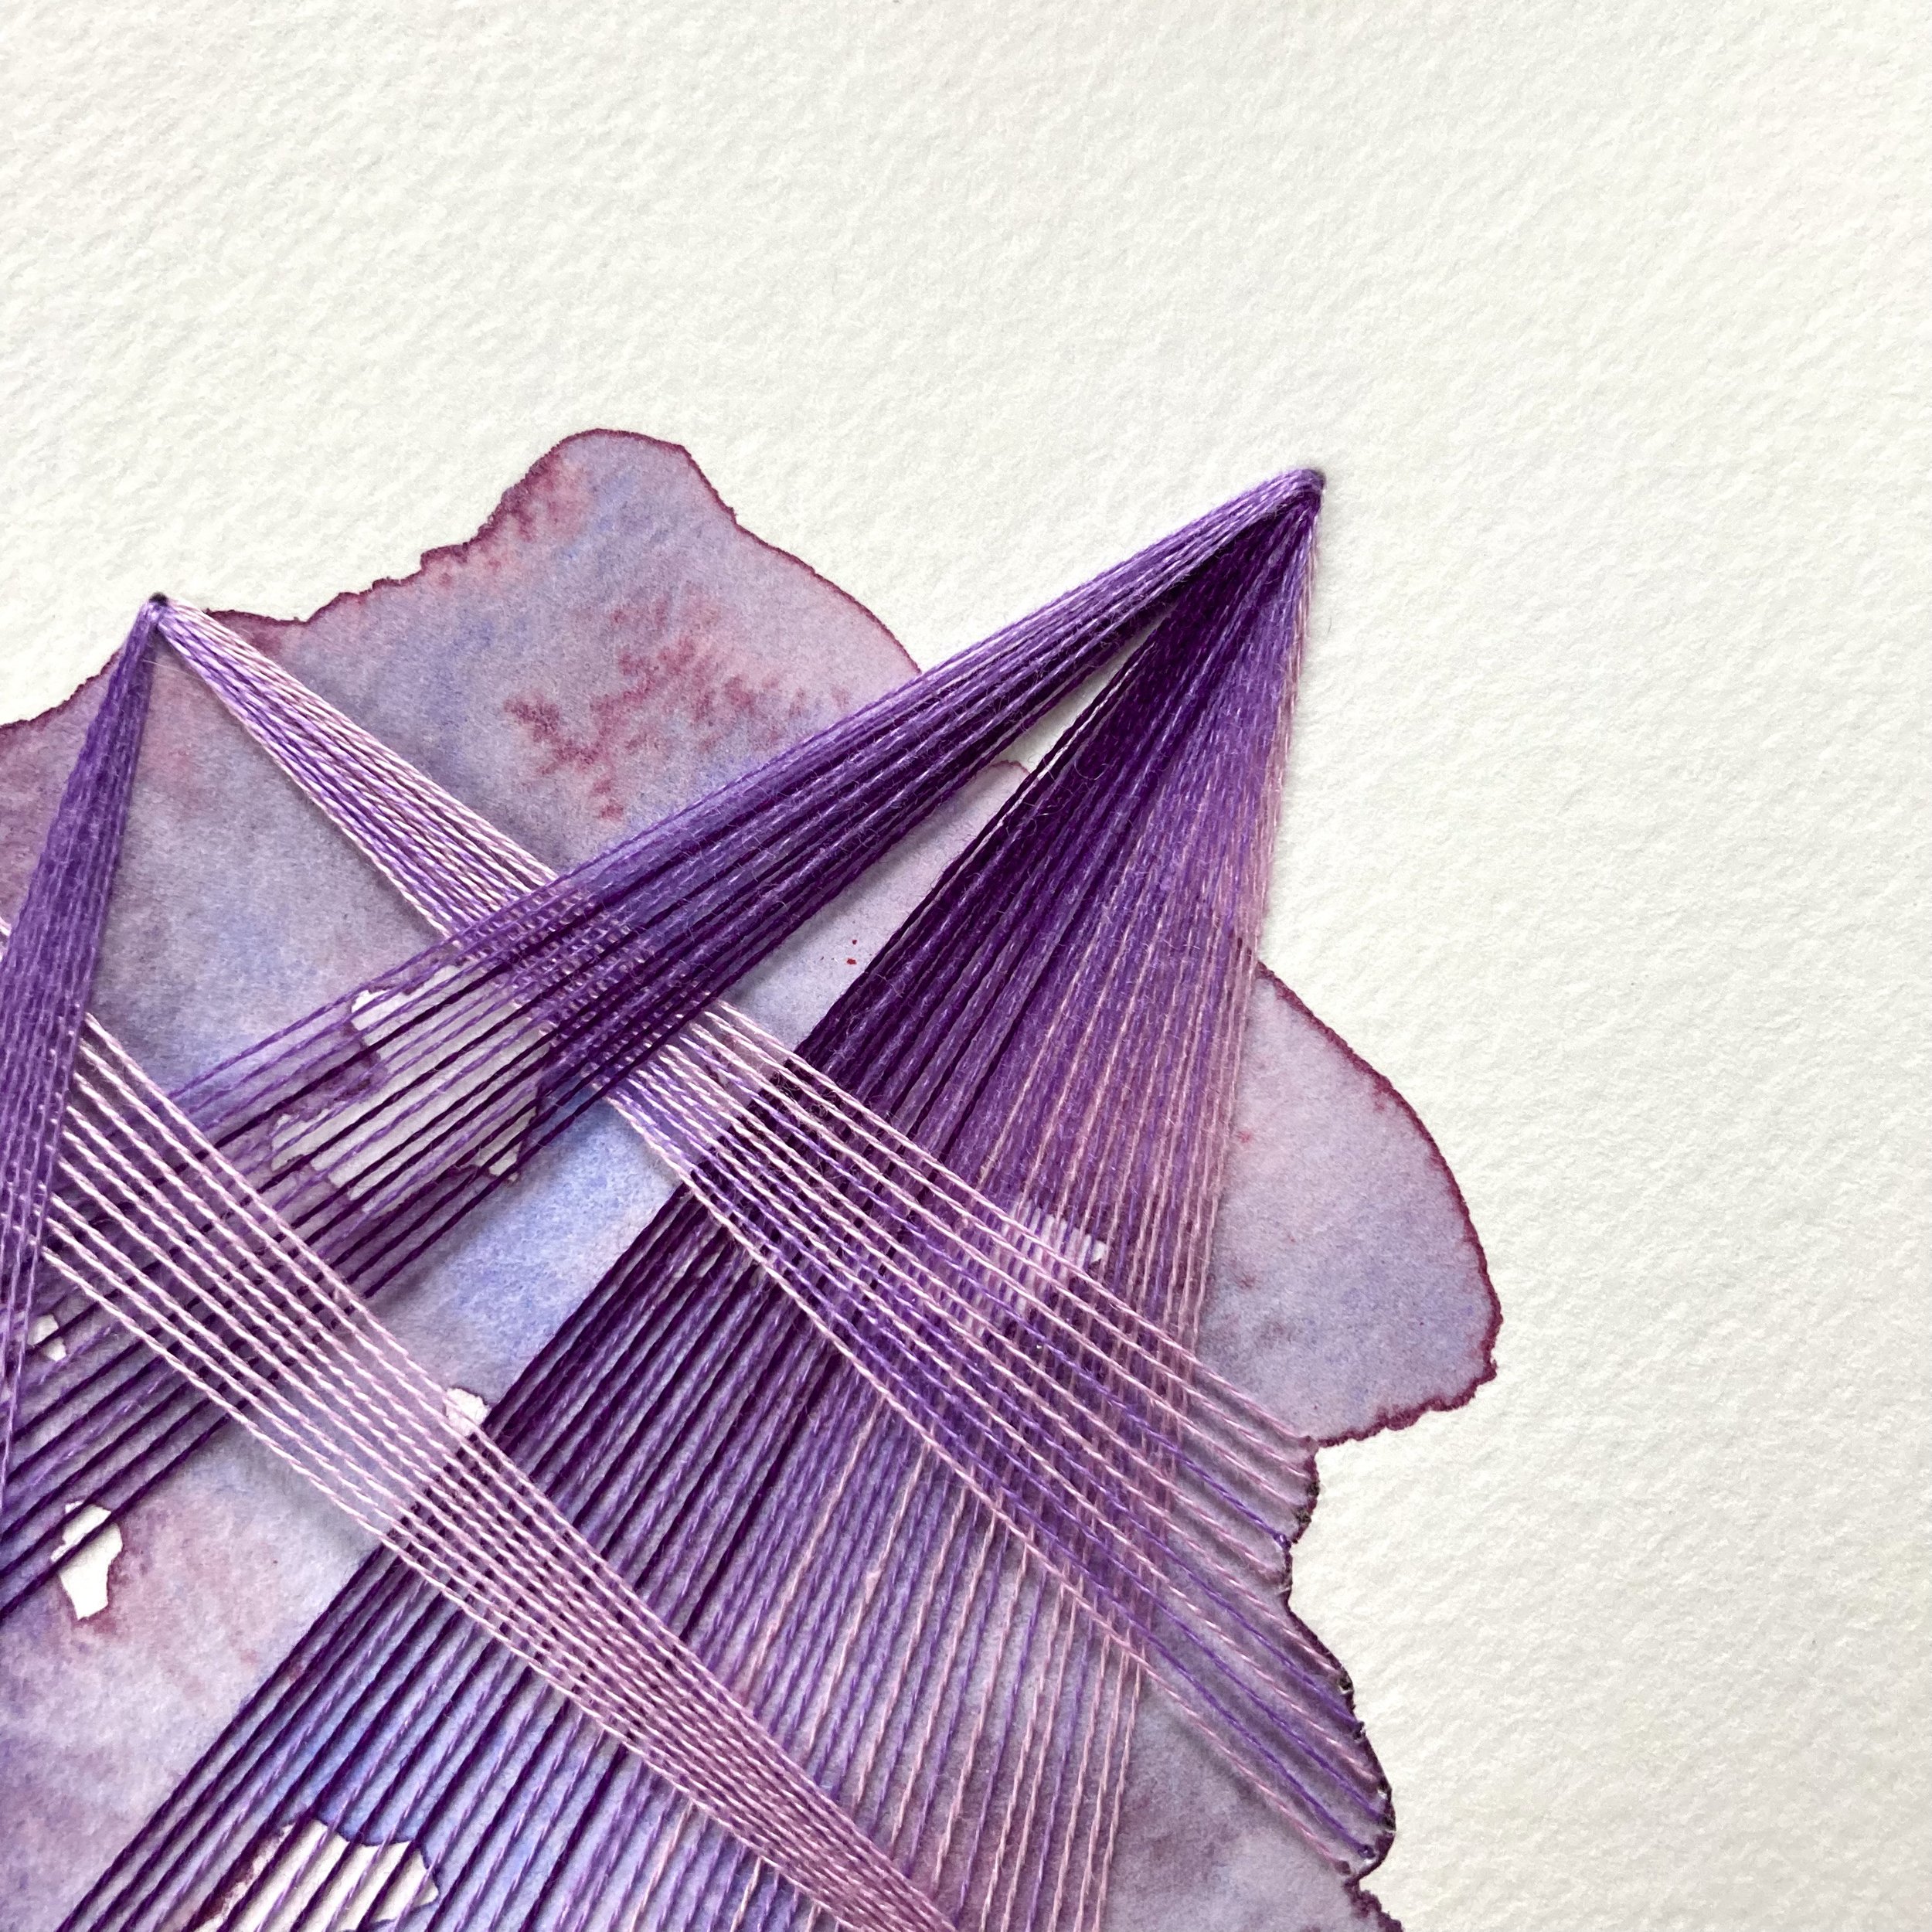 Watercolor and Embroidery in Amethyst II--detail 1